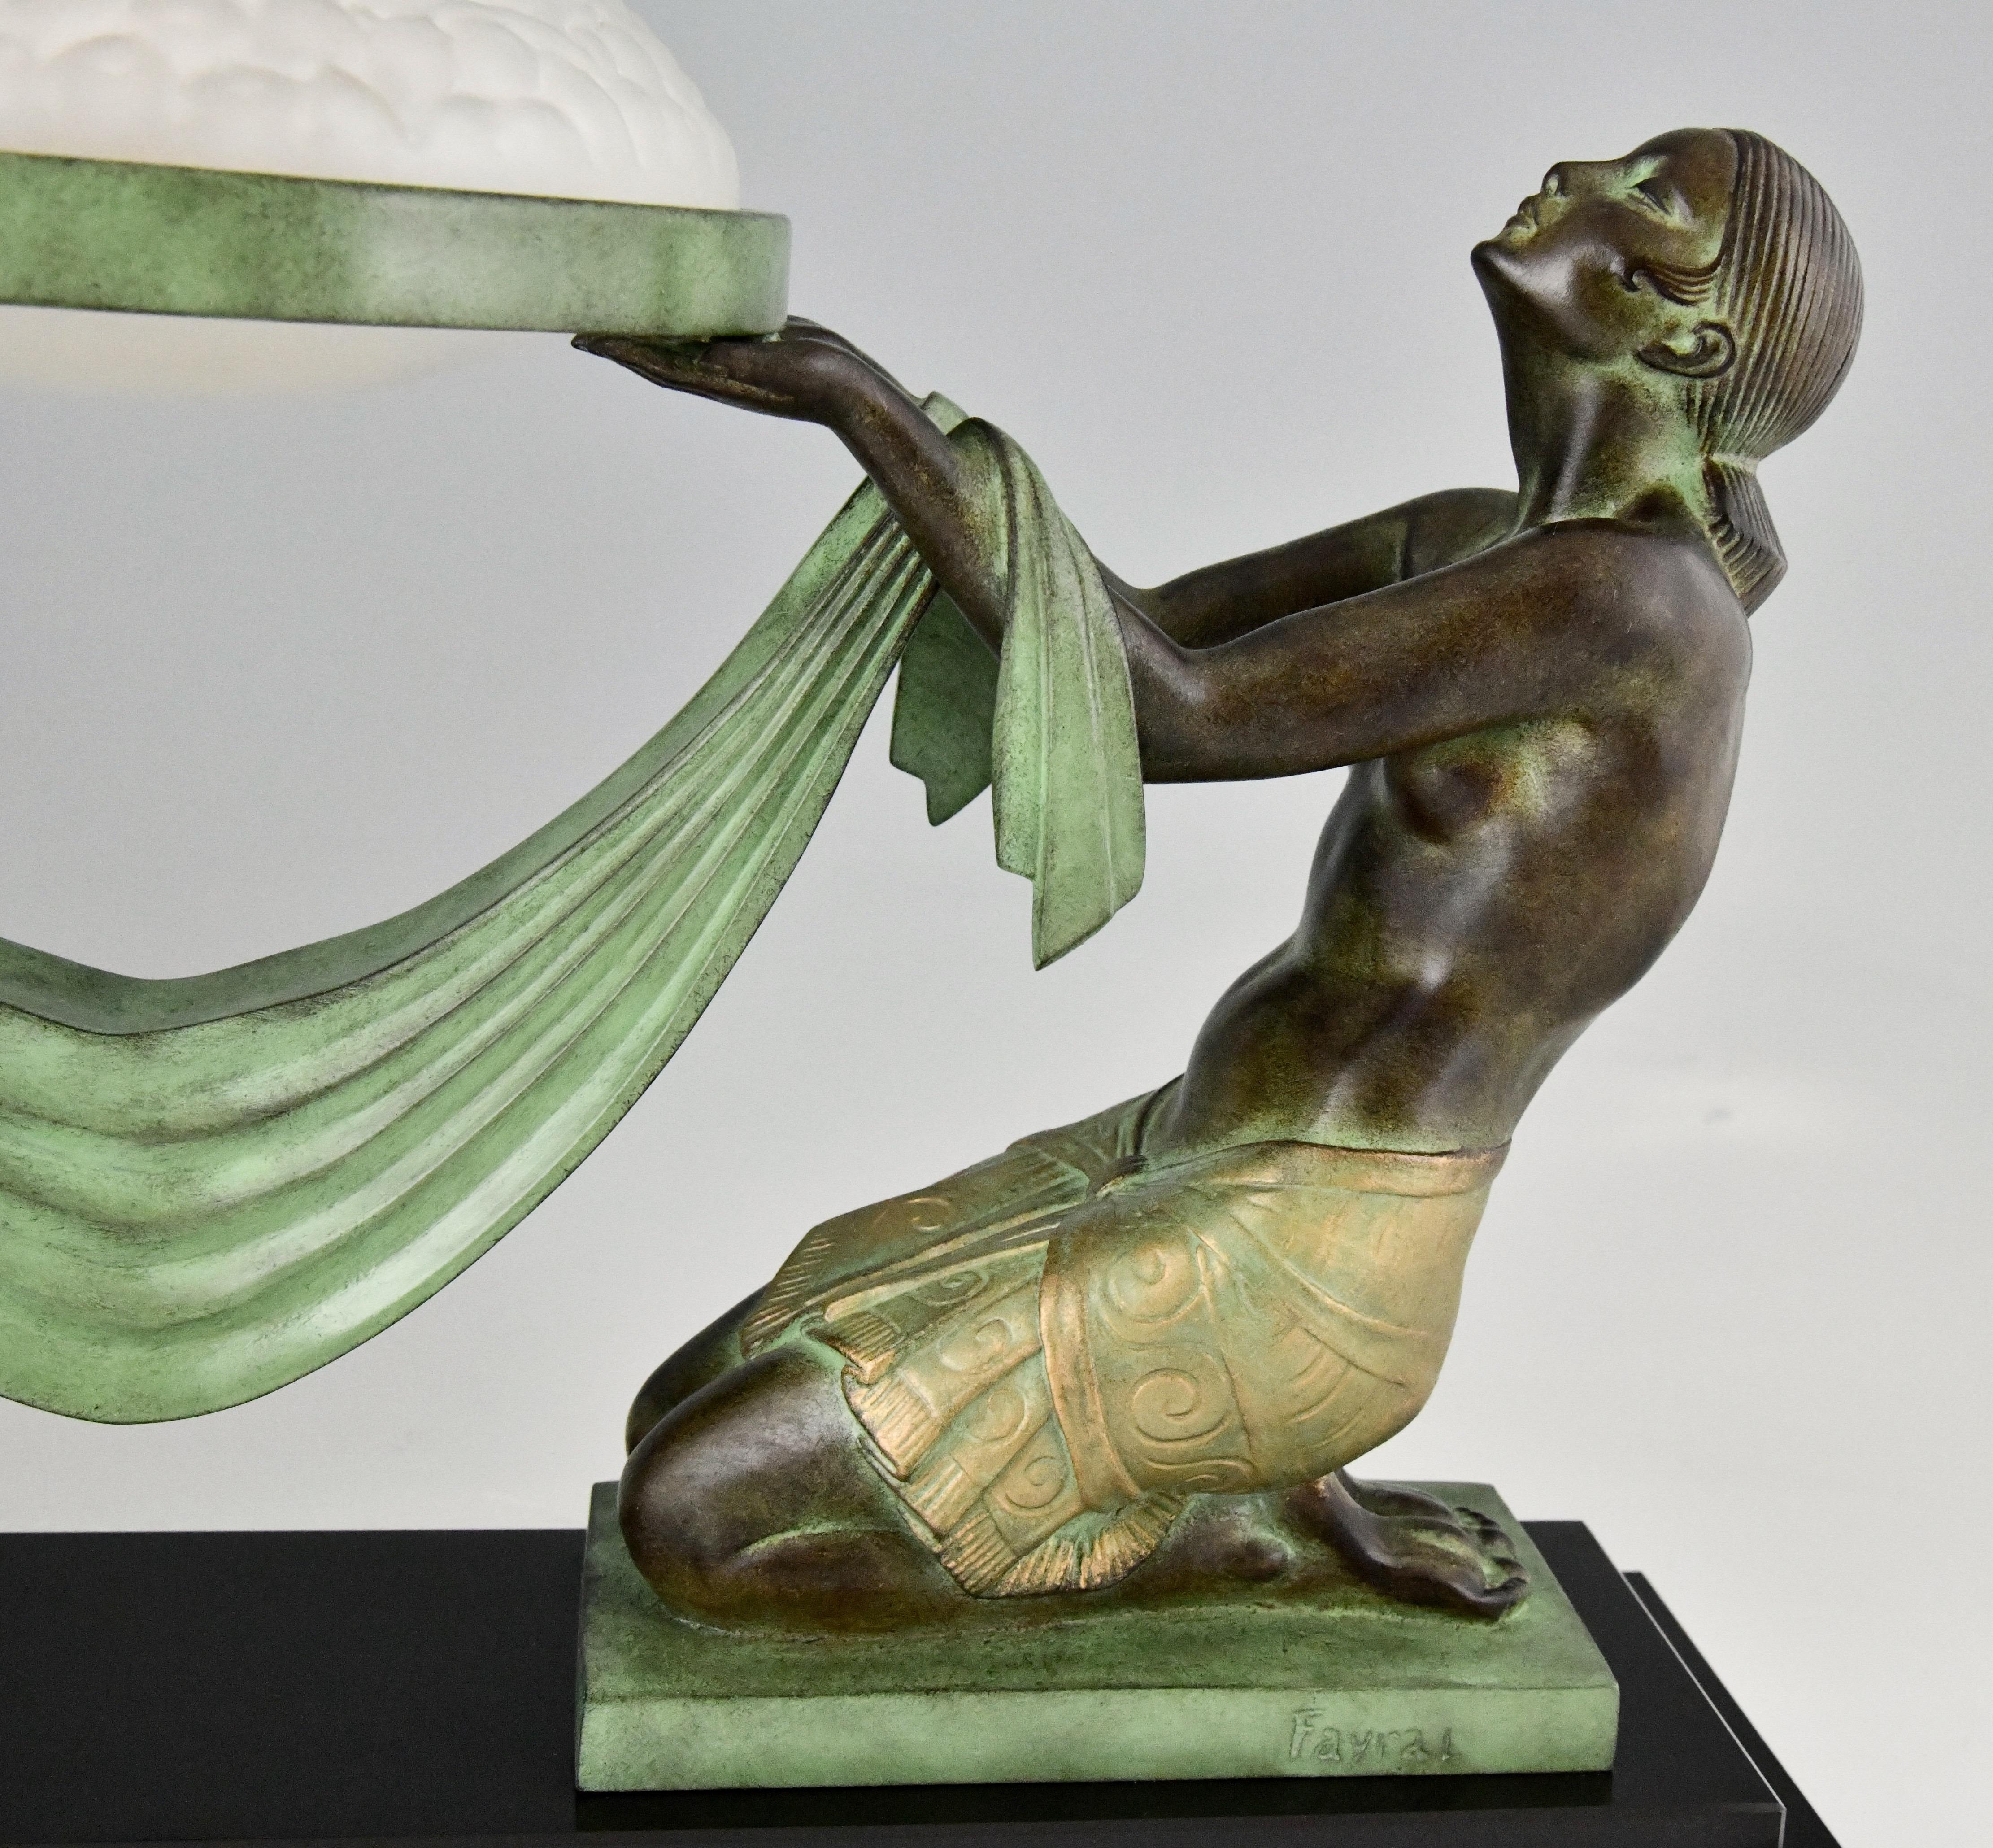 Art Deco Style Table Lamp with Two Kneeling Nudes by Fayral for Max Le Verrier For Sale 3